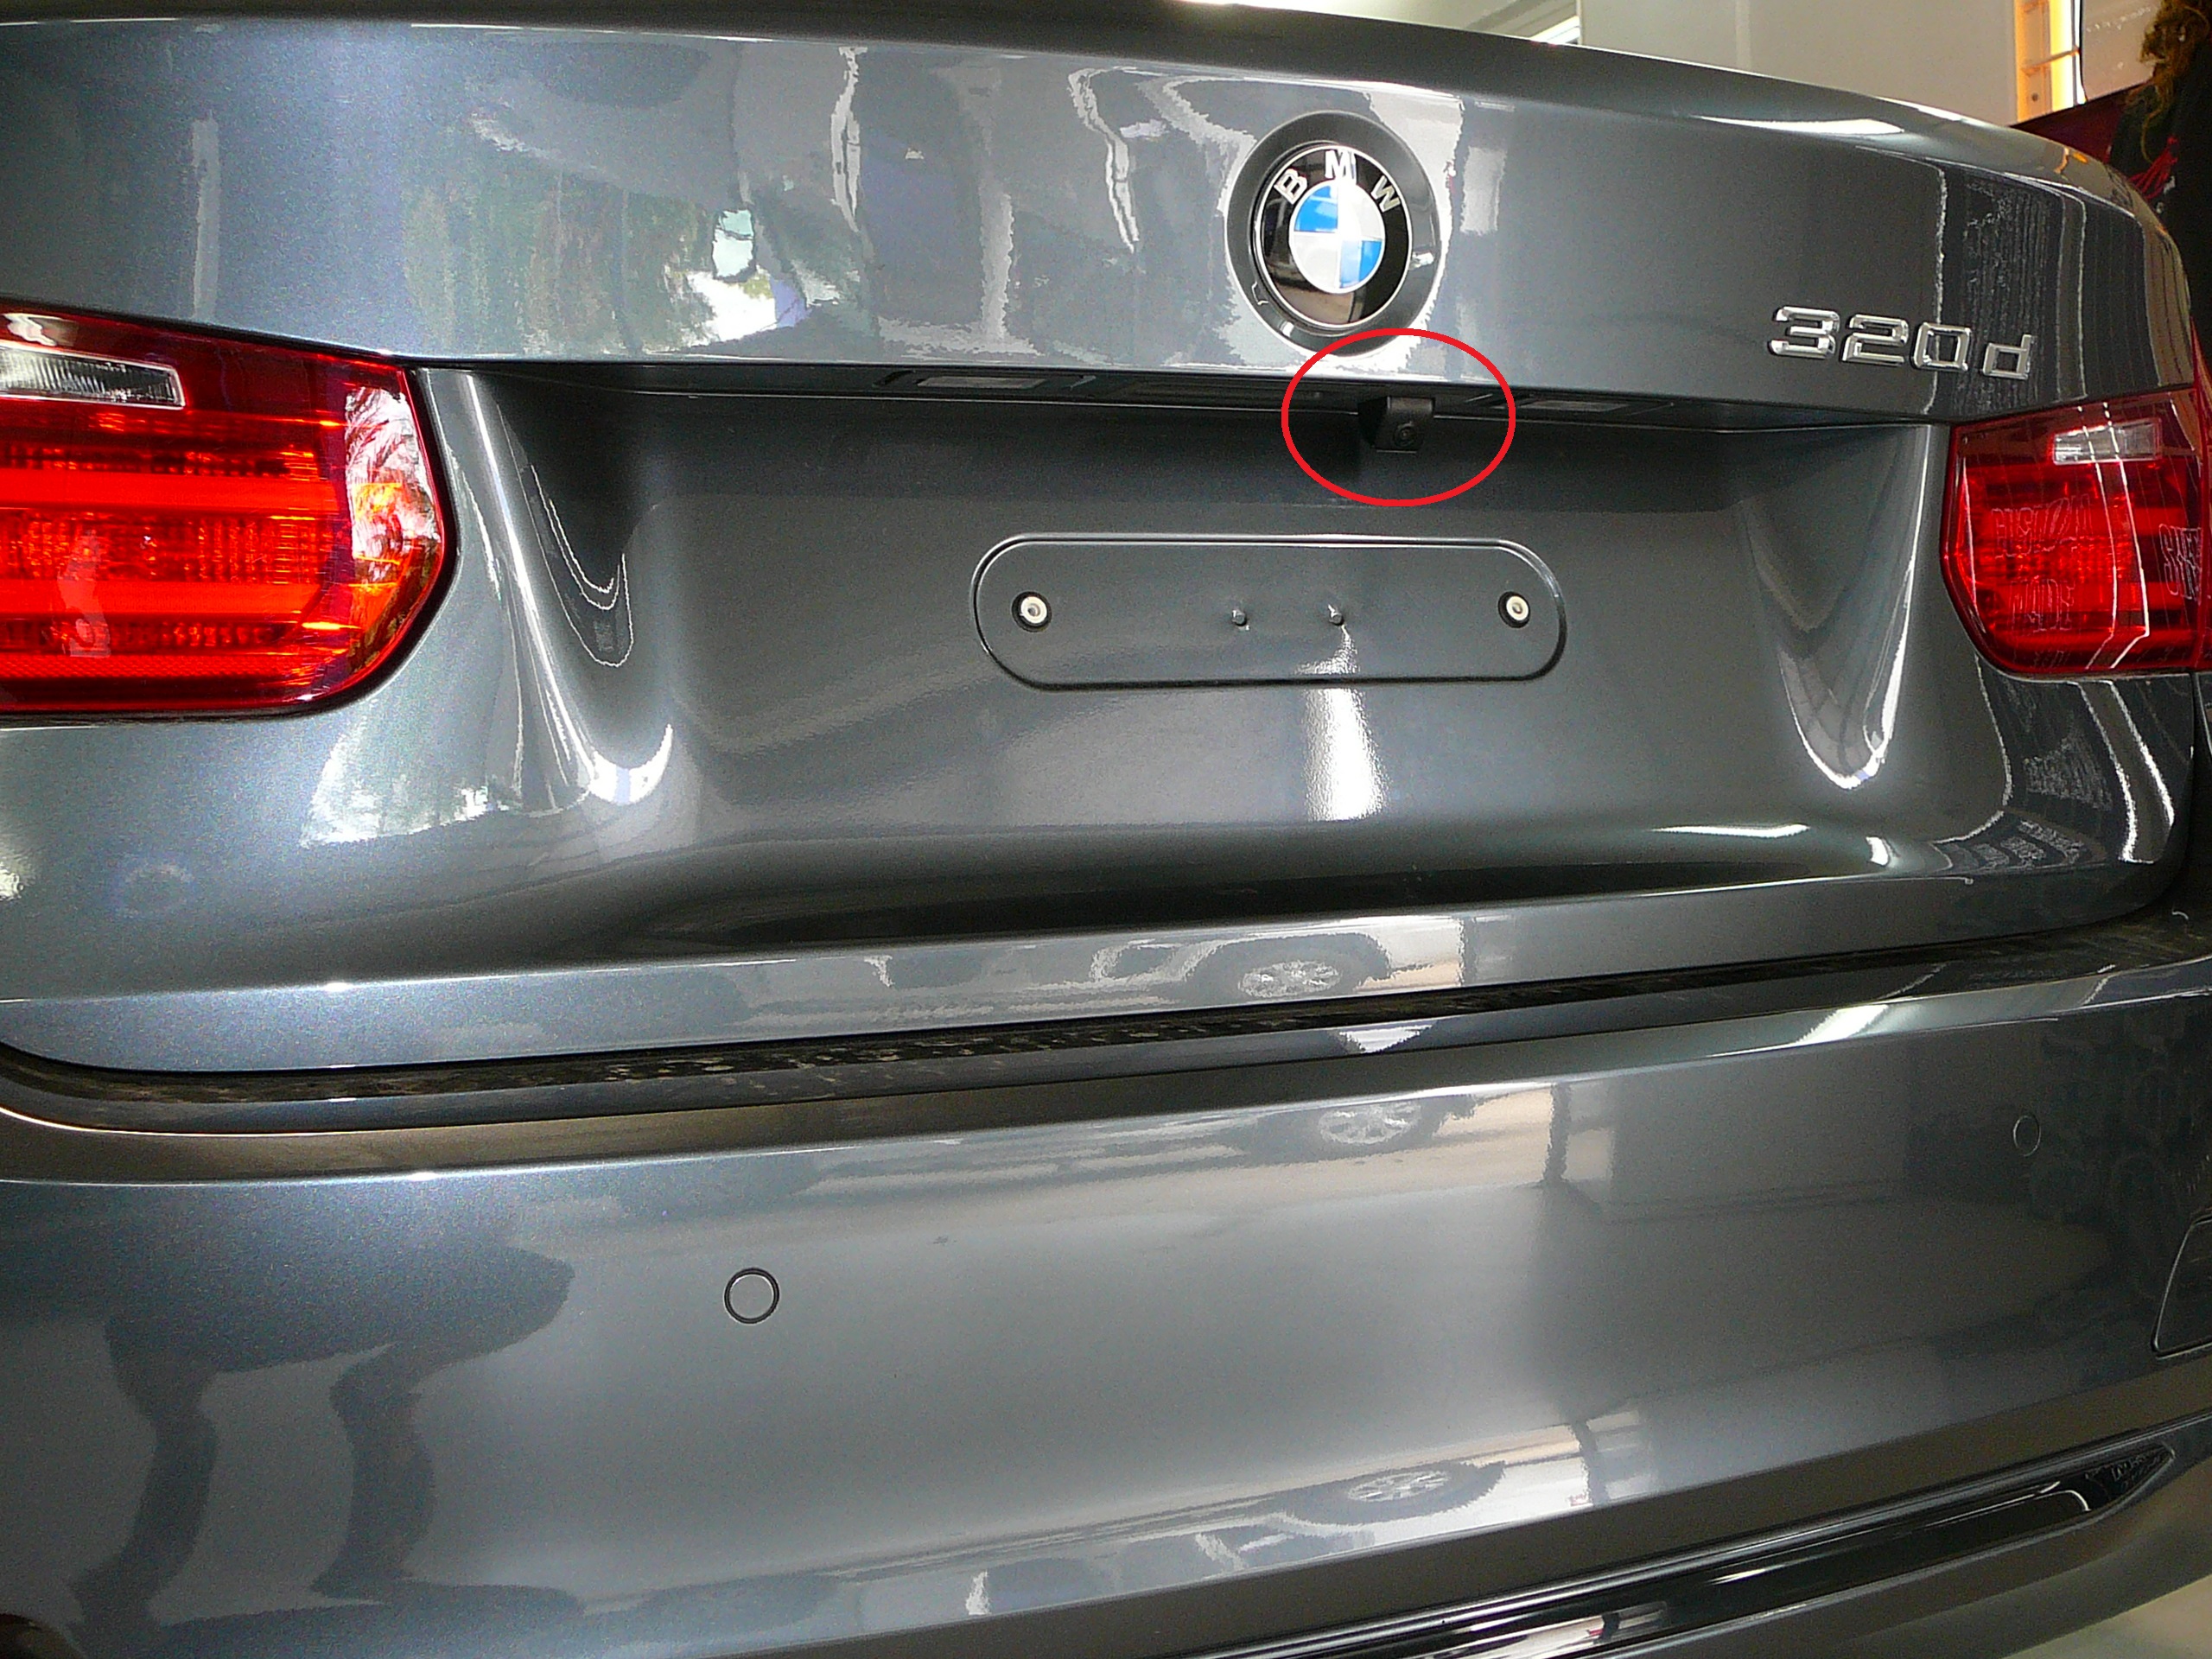 BMW 320d 2013, Aftermarket Reverse Camera Installation using the Factory BMW Screen